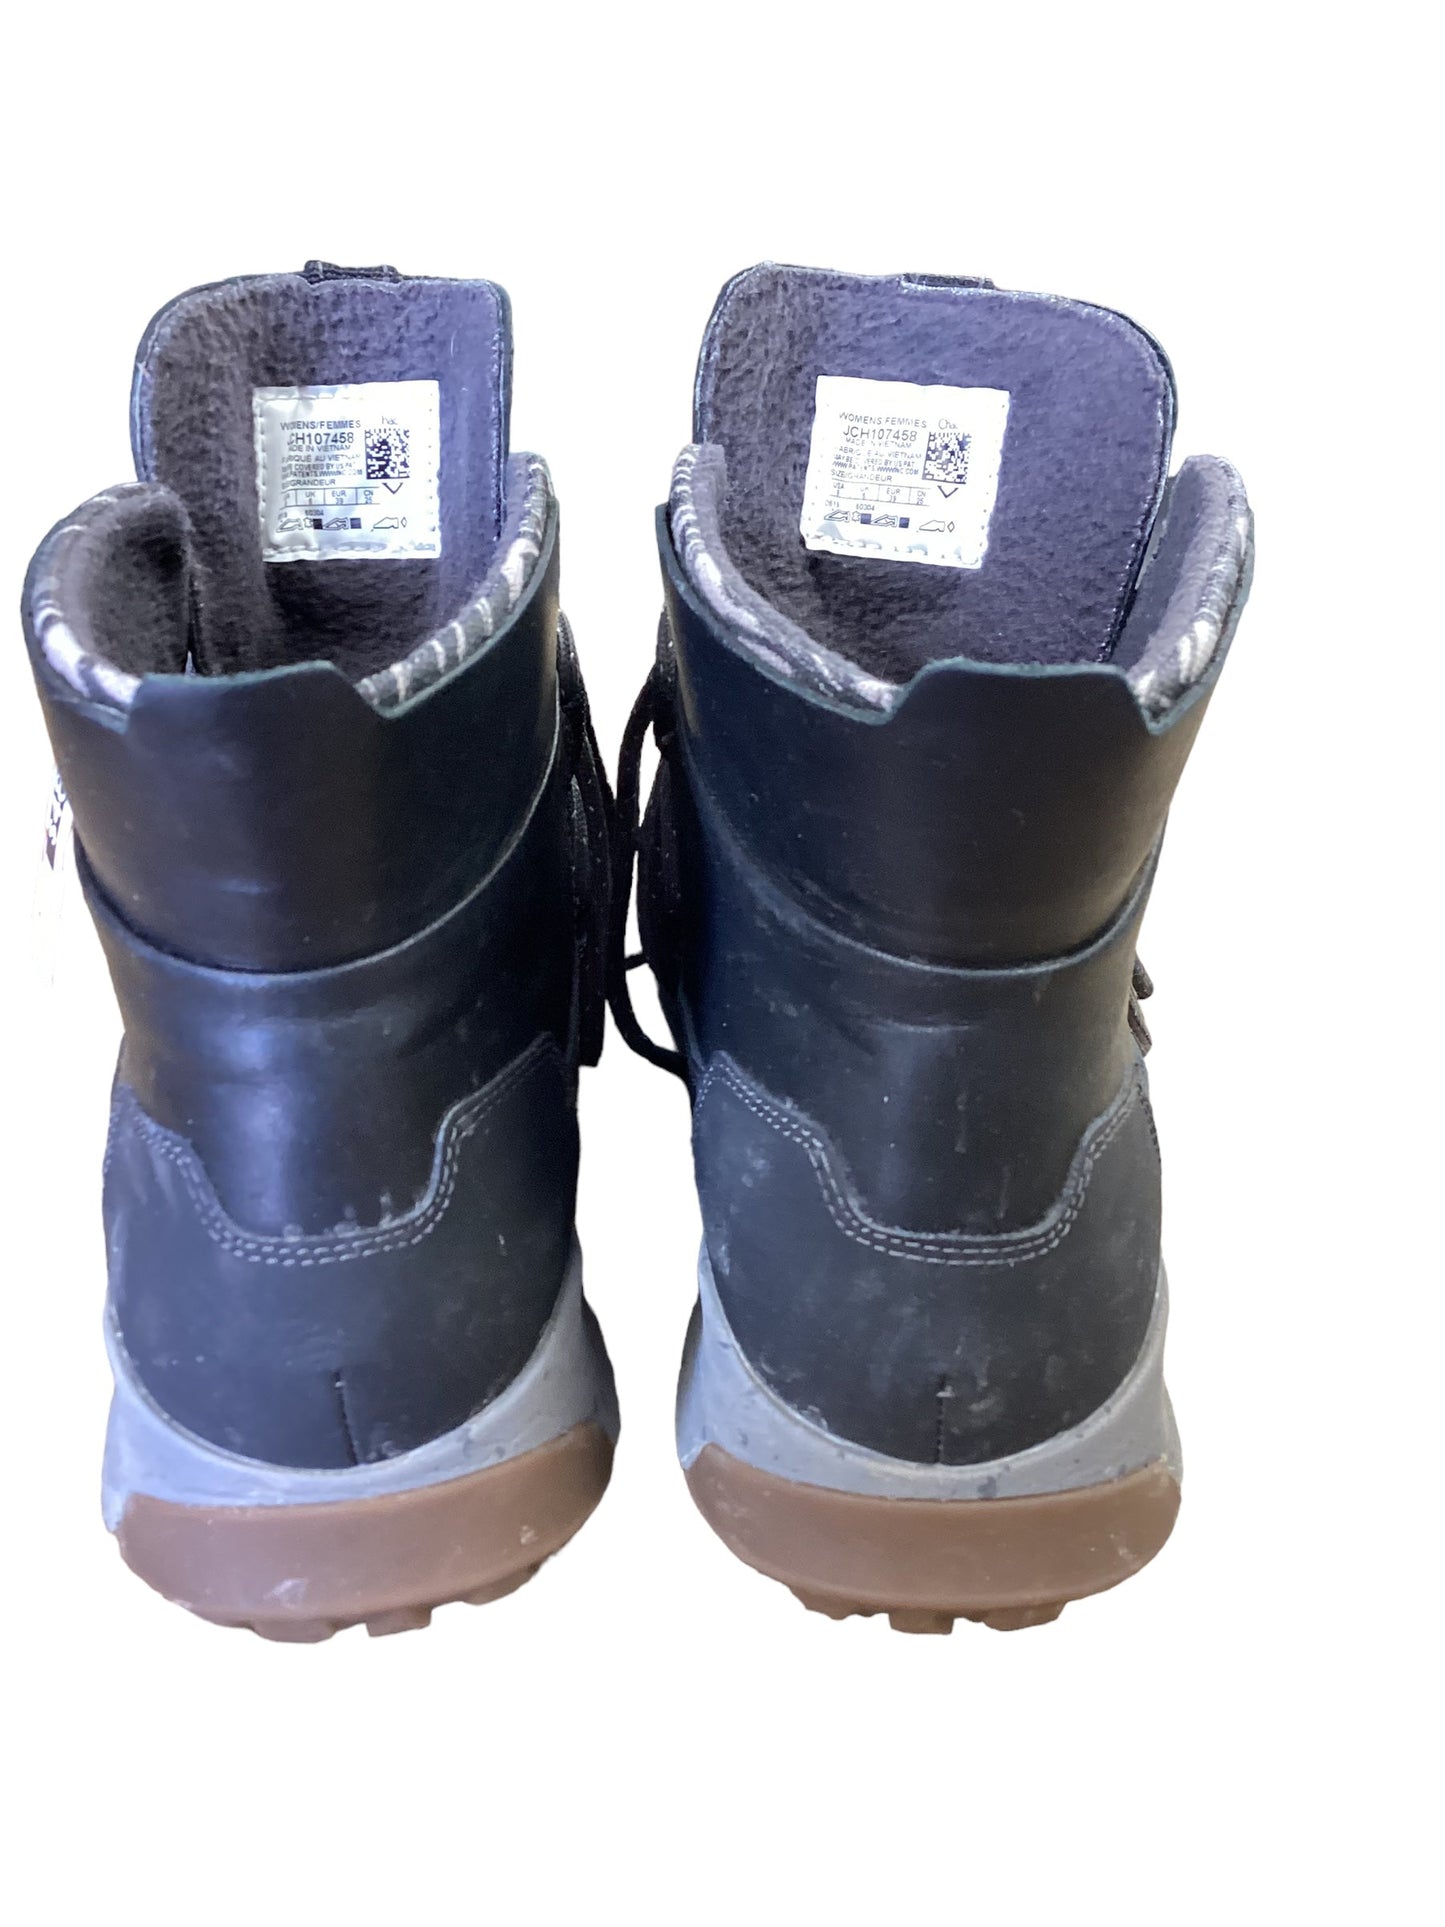 Boots Snow By Chacos  Size: 8